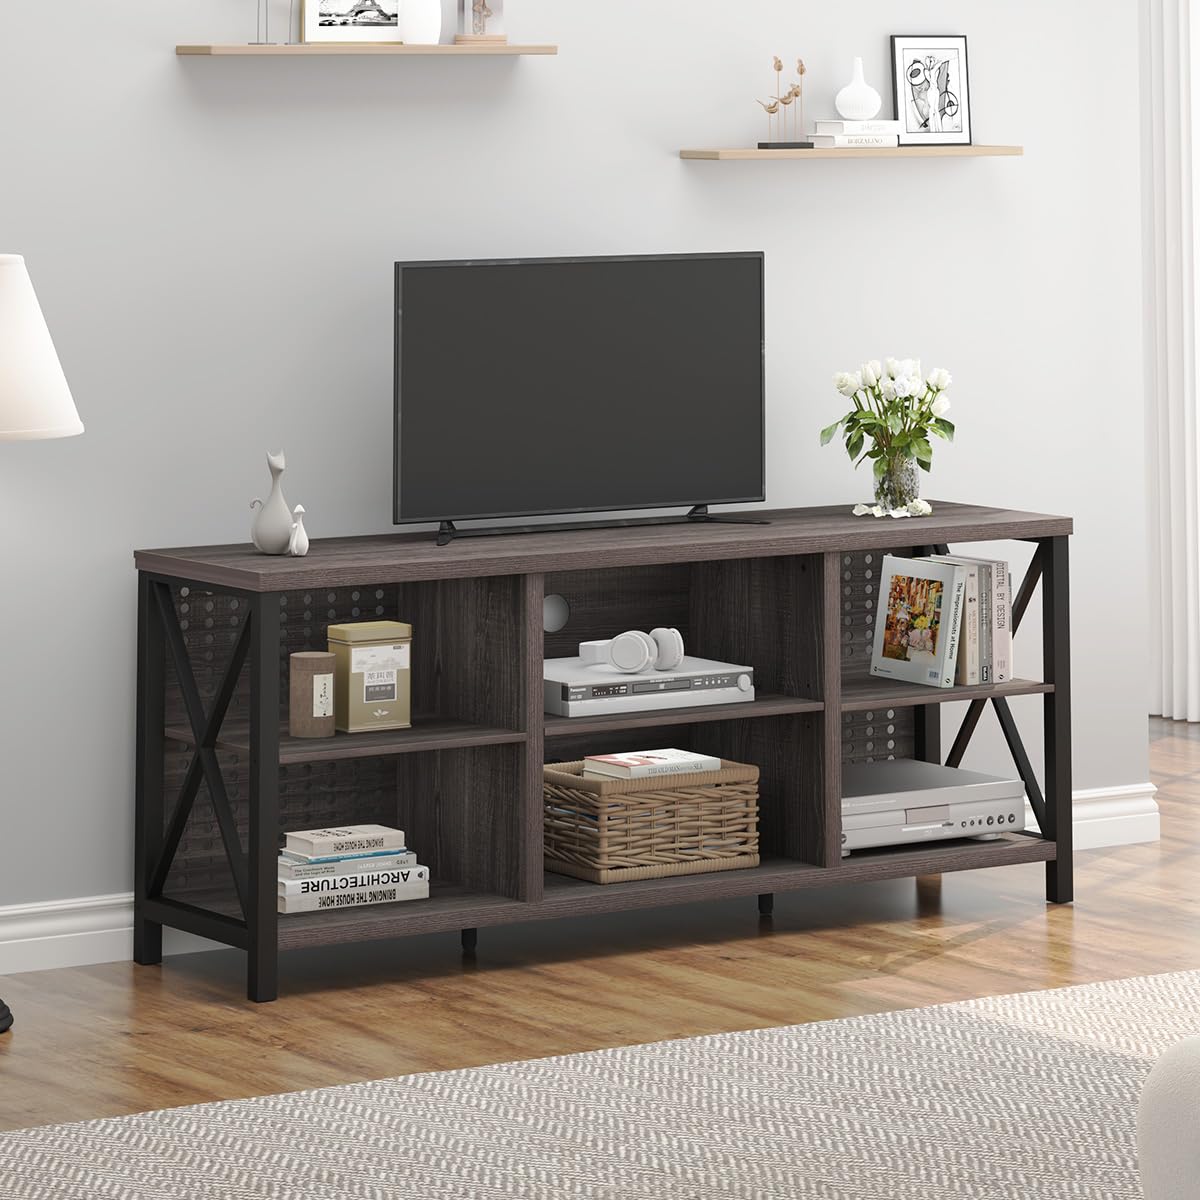 LVB TV Stand for 70 Inch TV, Rustic Industrial Entertainment Center, Large Television Stands for Living Bedroom, Long Wood Metal TV Table Stand with